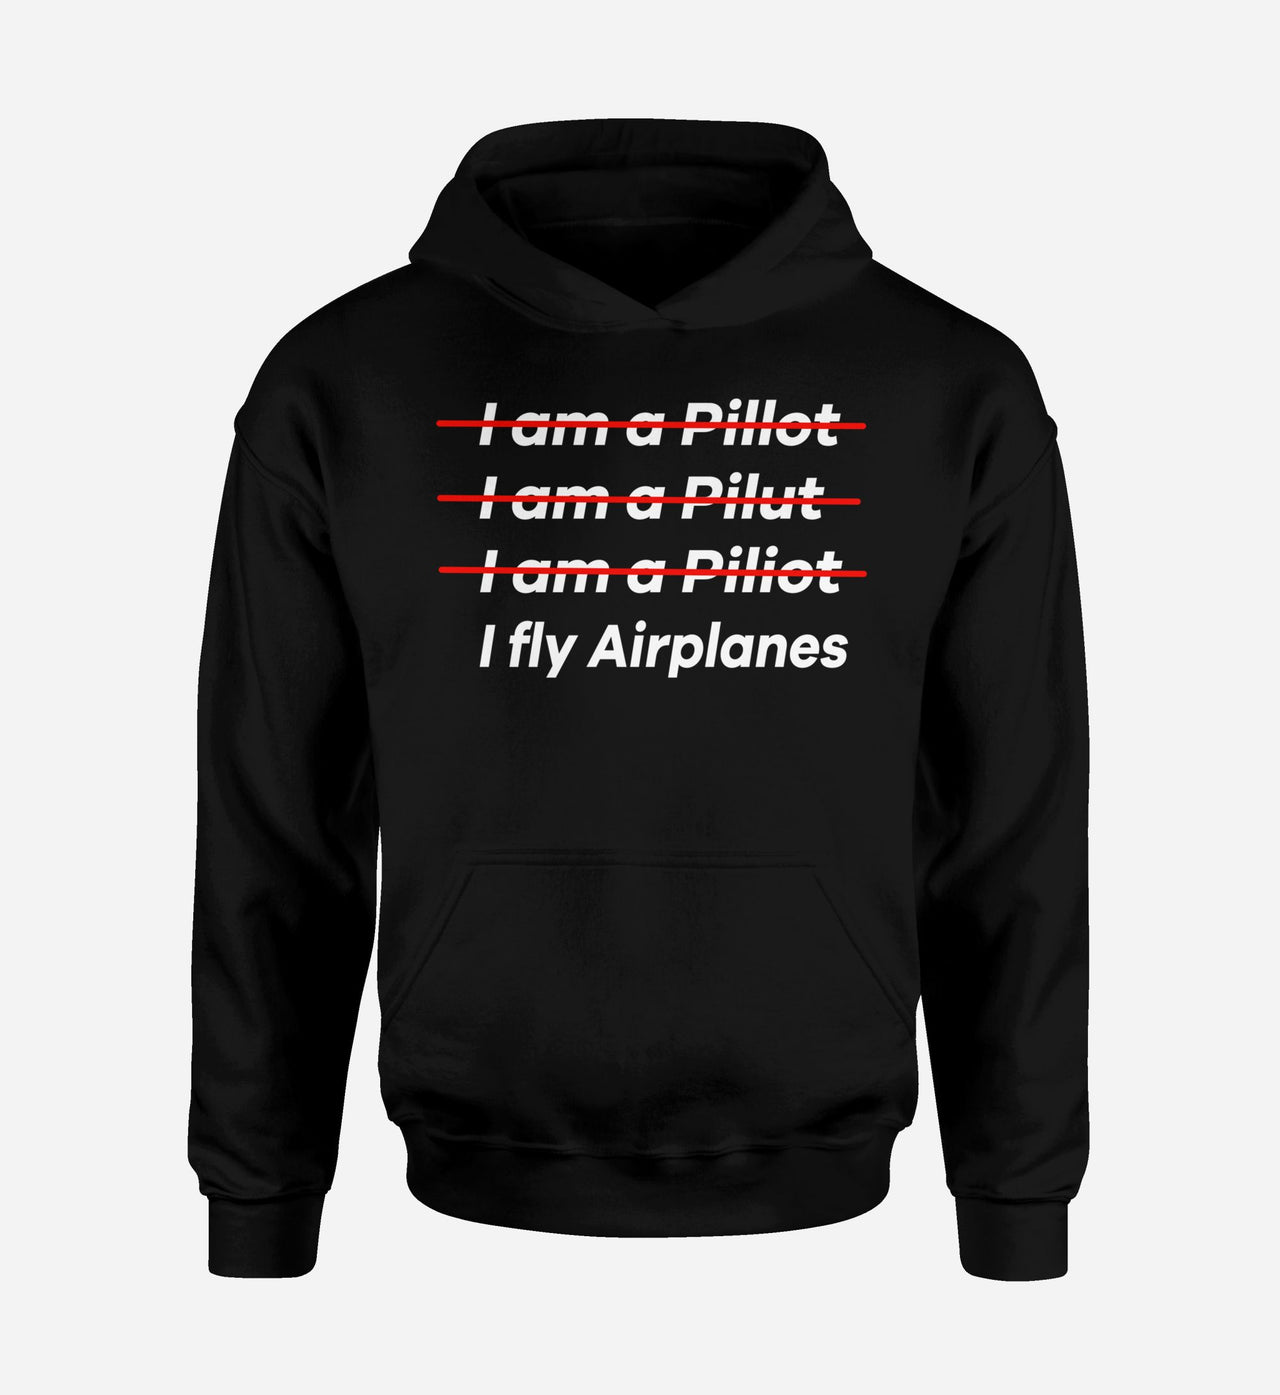 I Fly Airplanes Designed Hoodies